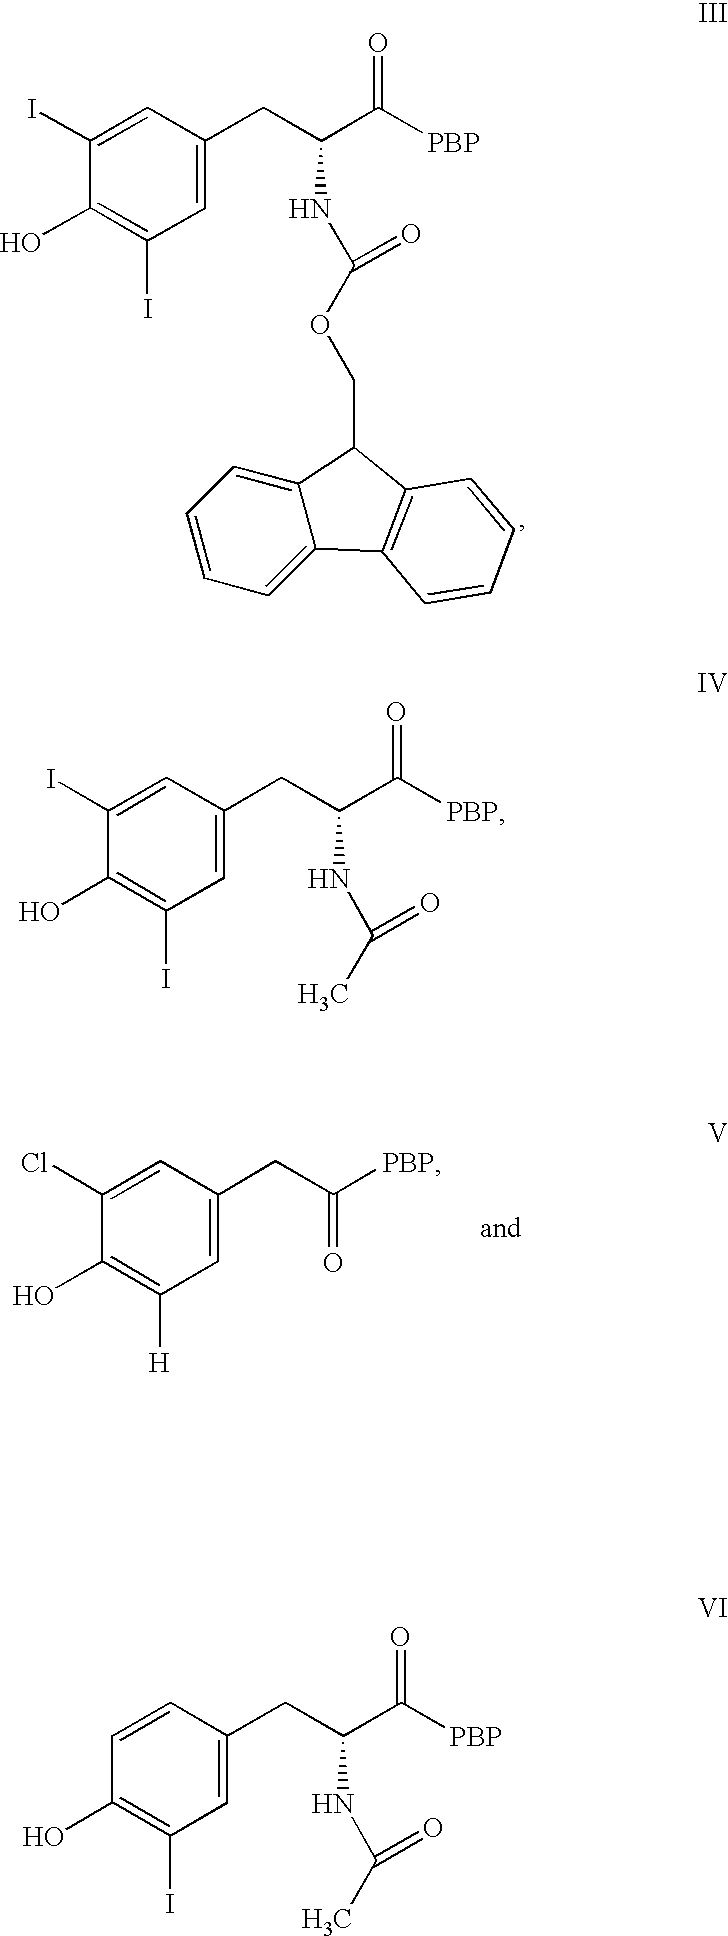 Phycoerythrin labeled thyronine analogues and assays using labeled analogues